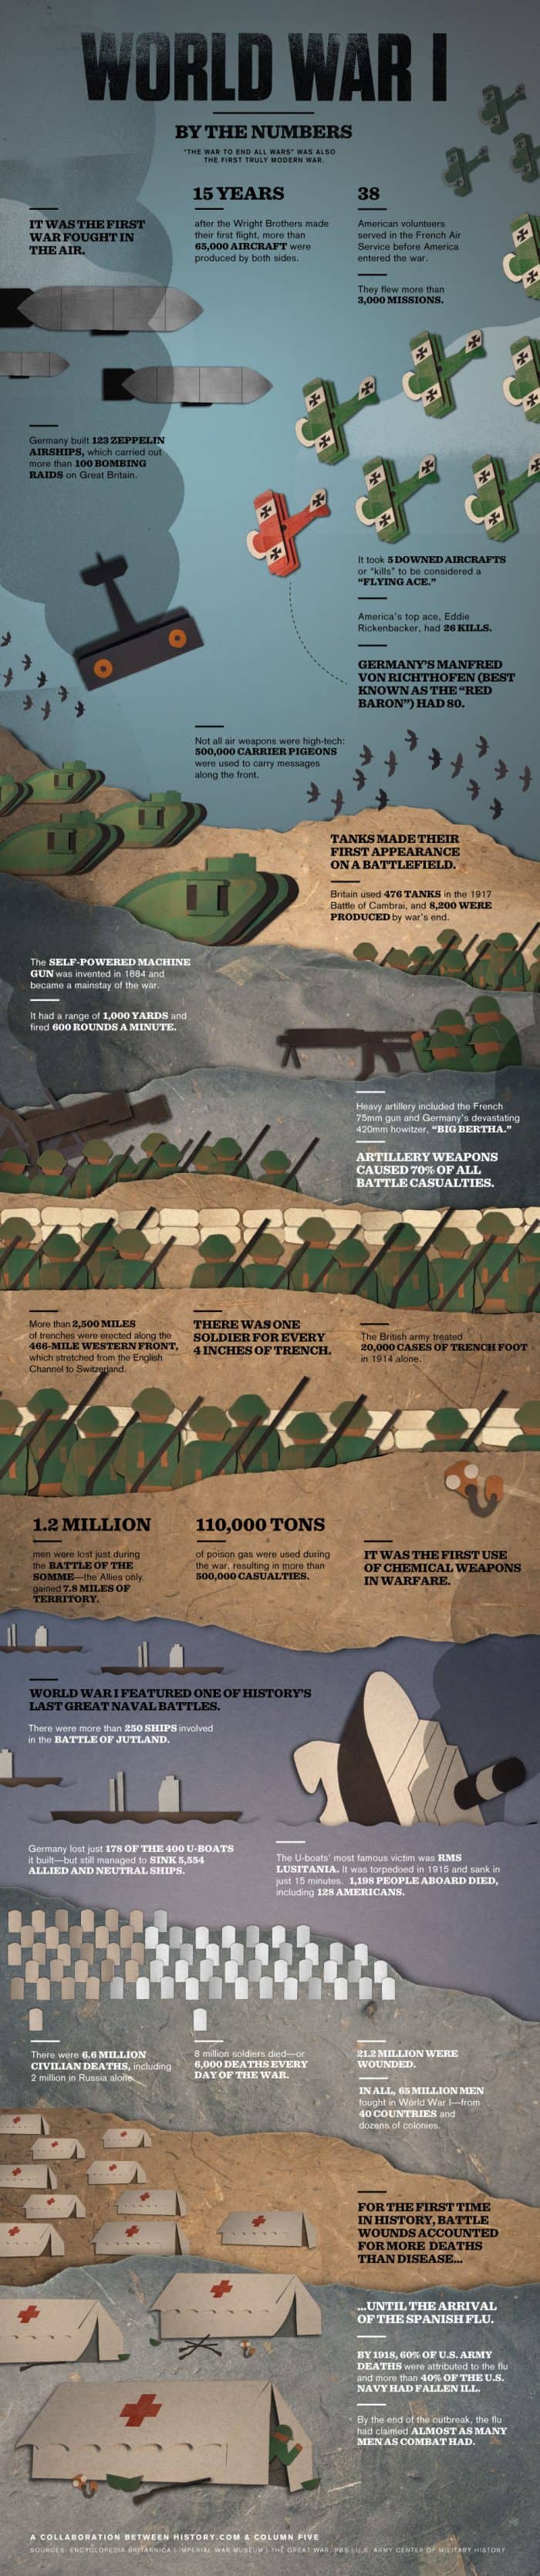 Important Facts to know about WWI by the numbers